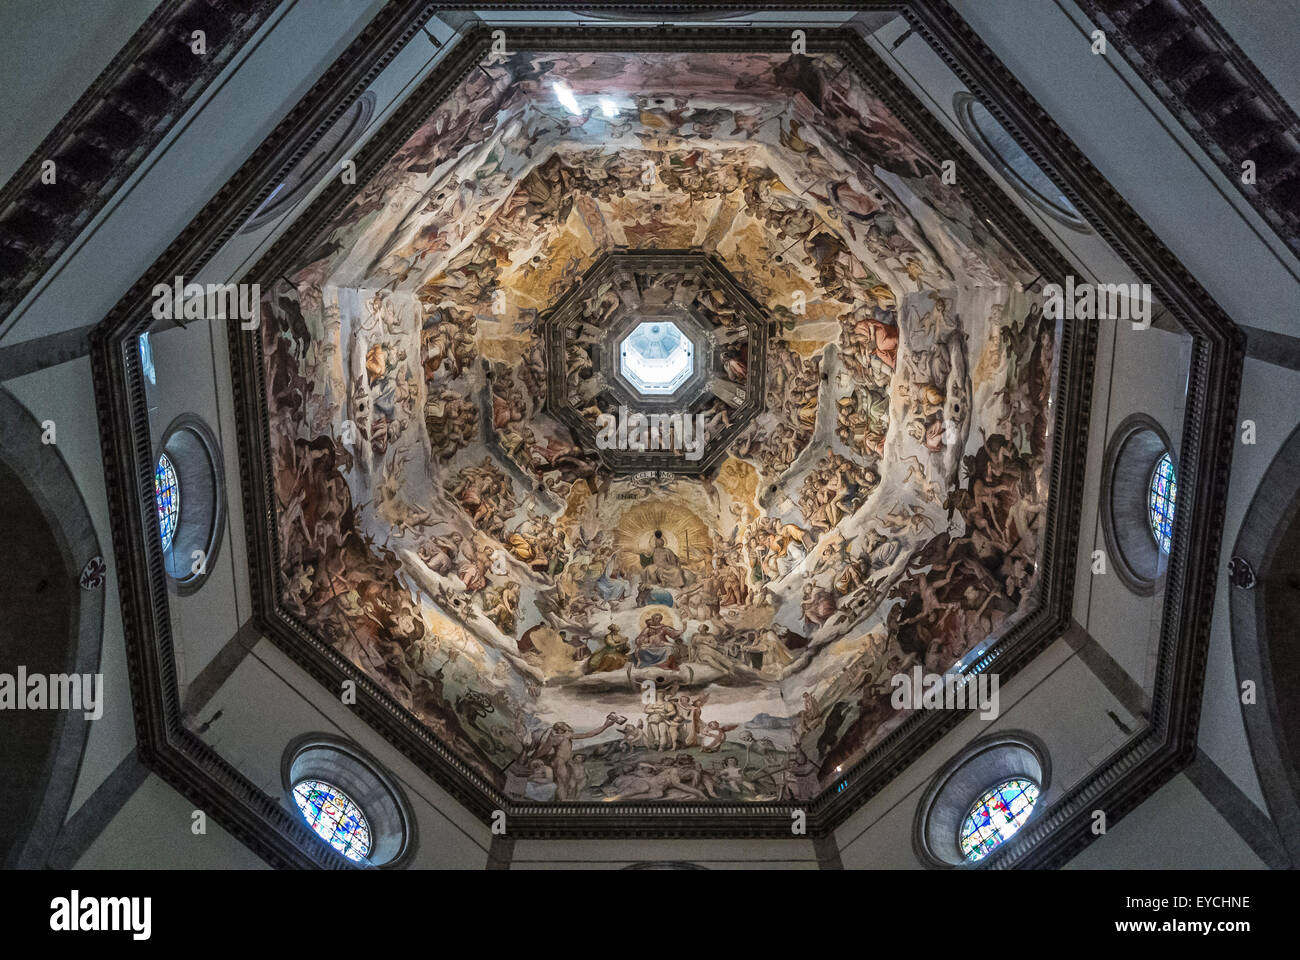 Interior of Florence Cathedral Brunelleschi dome. Painted by Giorgio Vasari and Federico Zuccari. Florence, Italy. Stock Photo